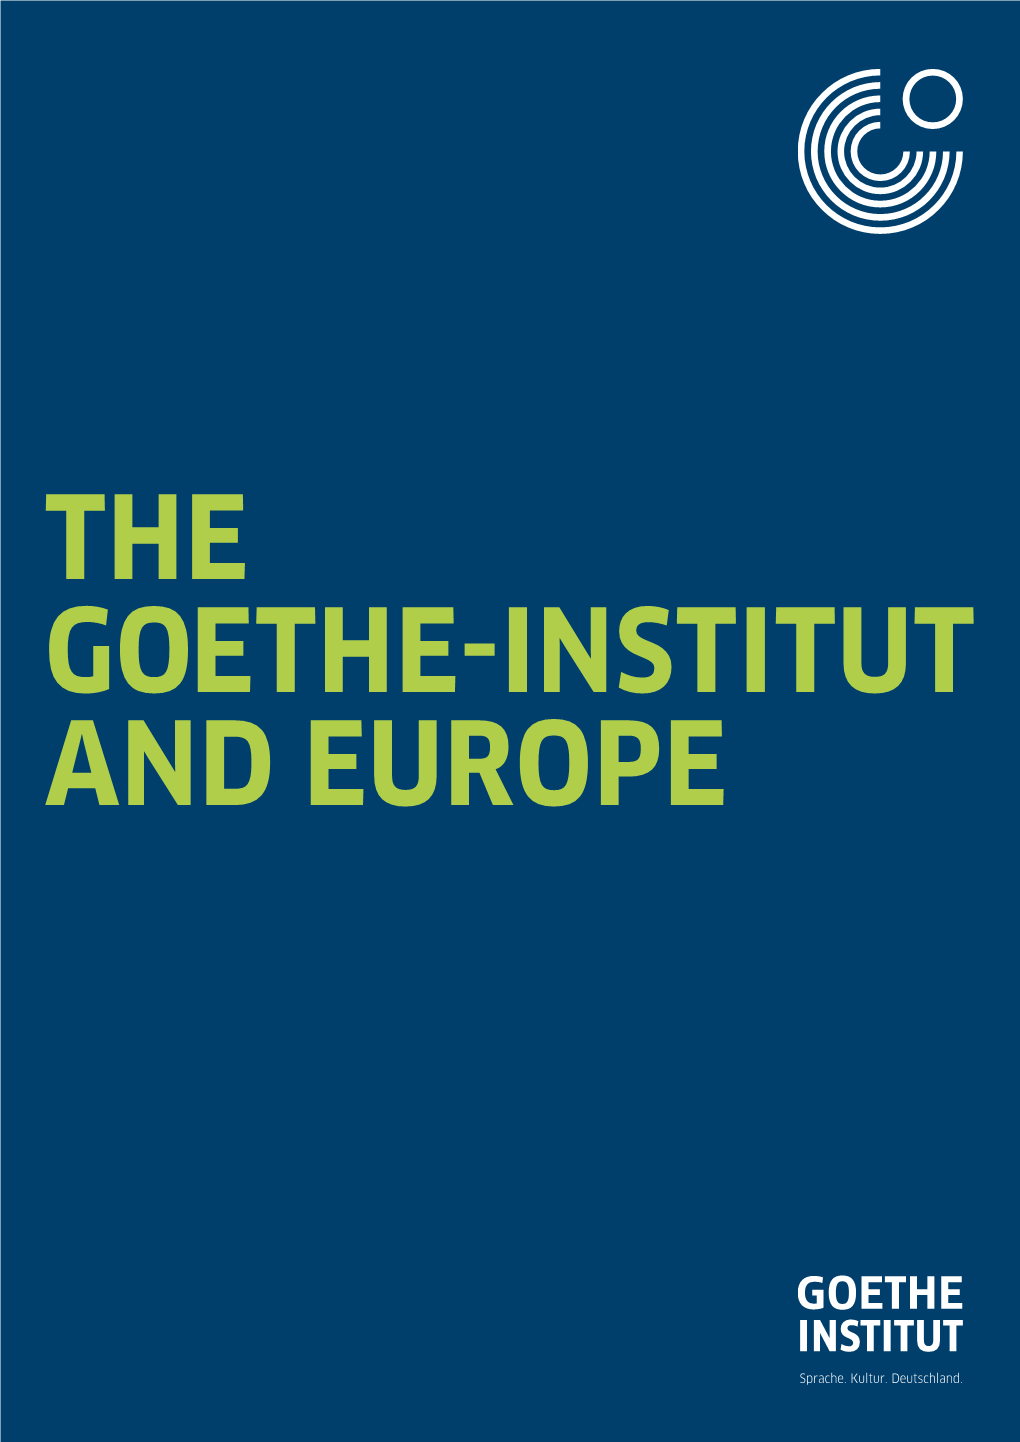 The Goethe-Institut and Europe